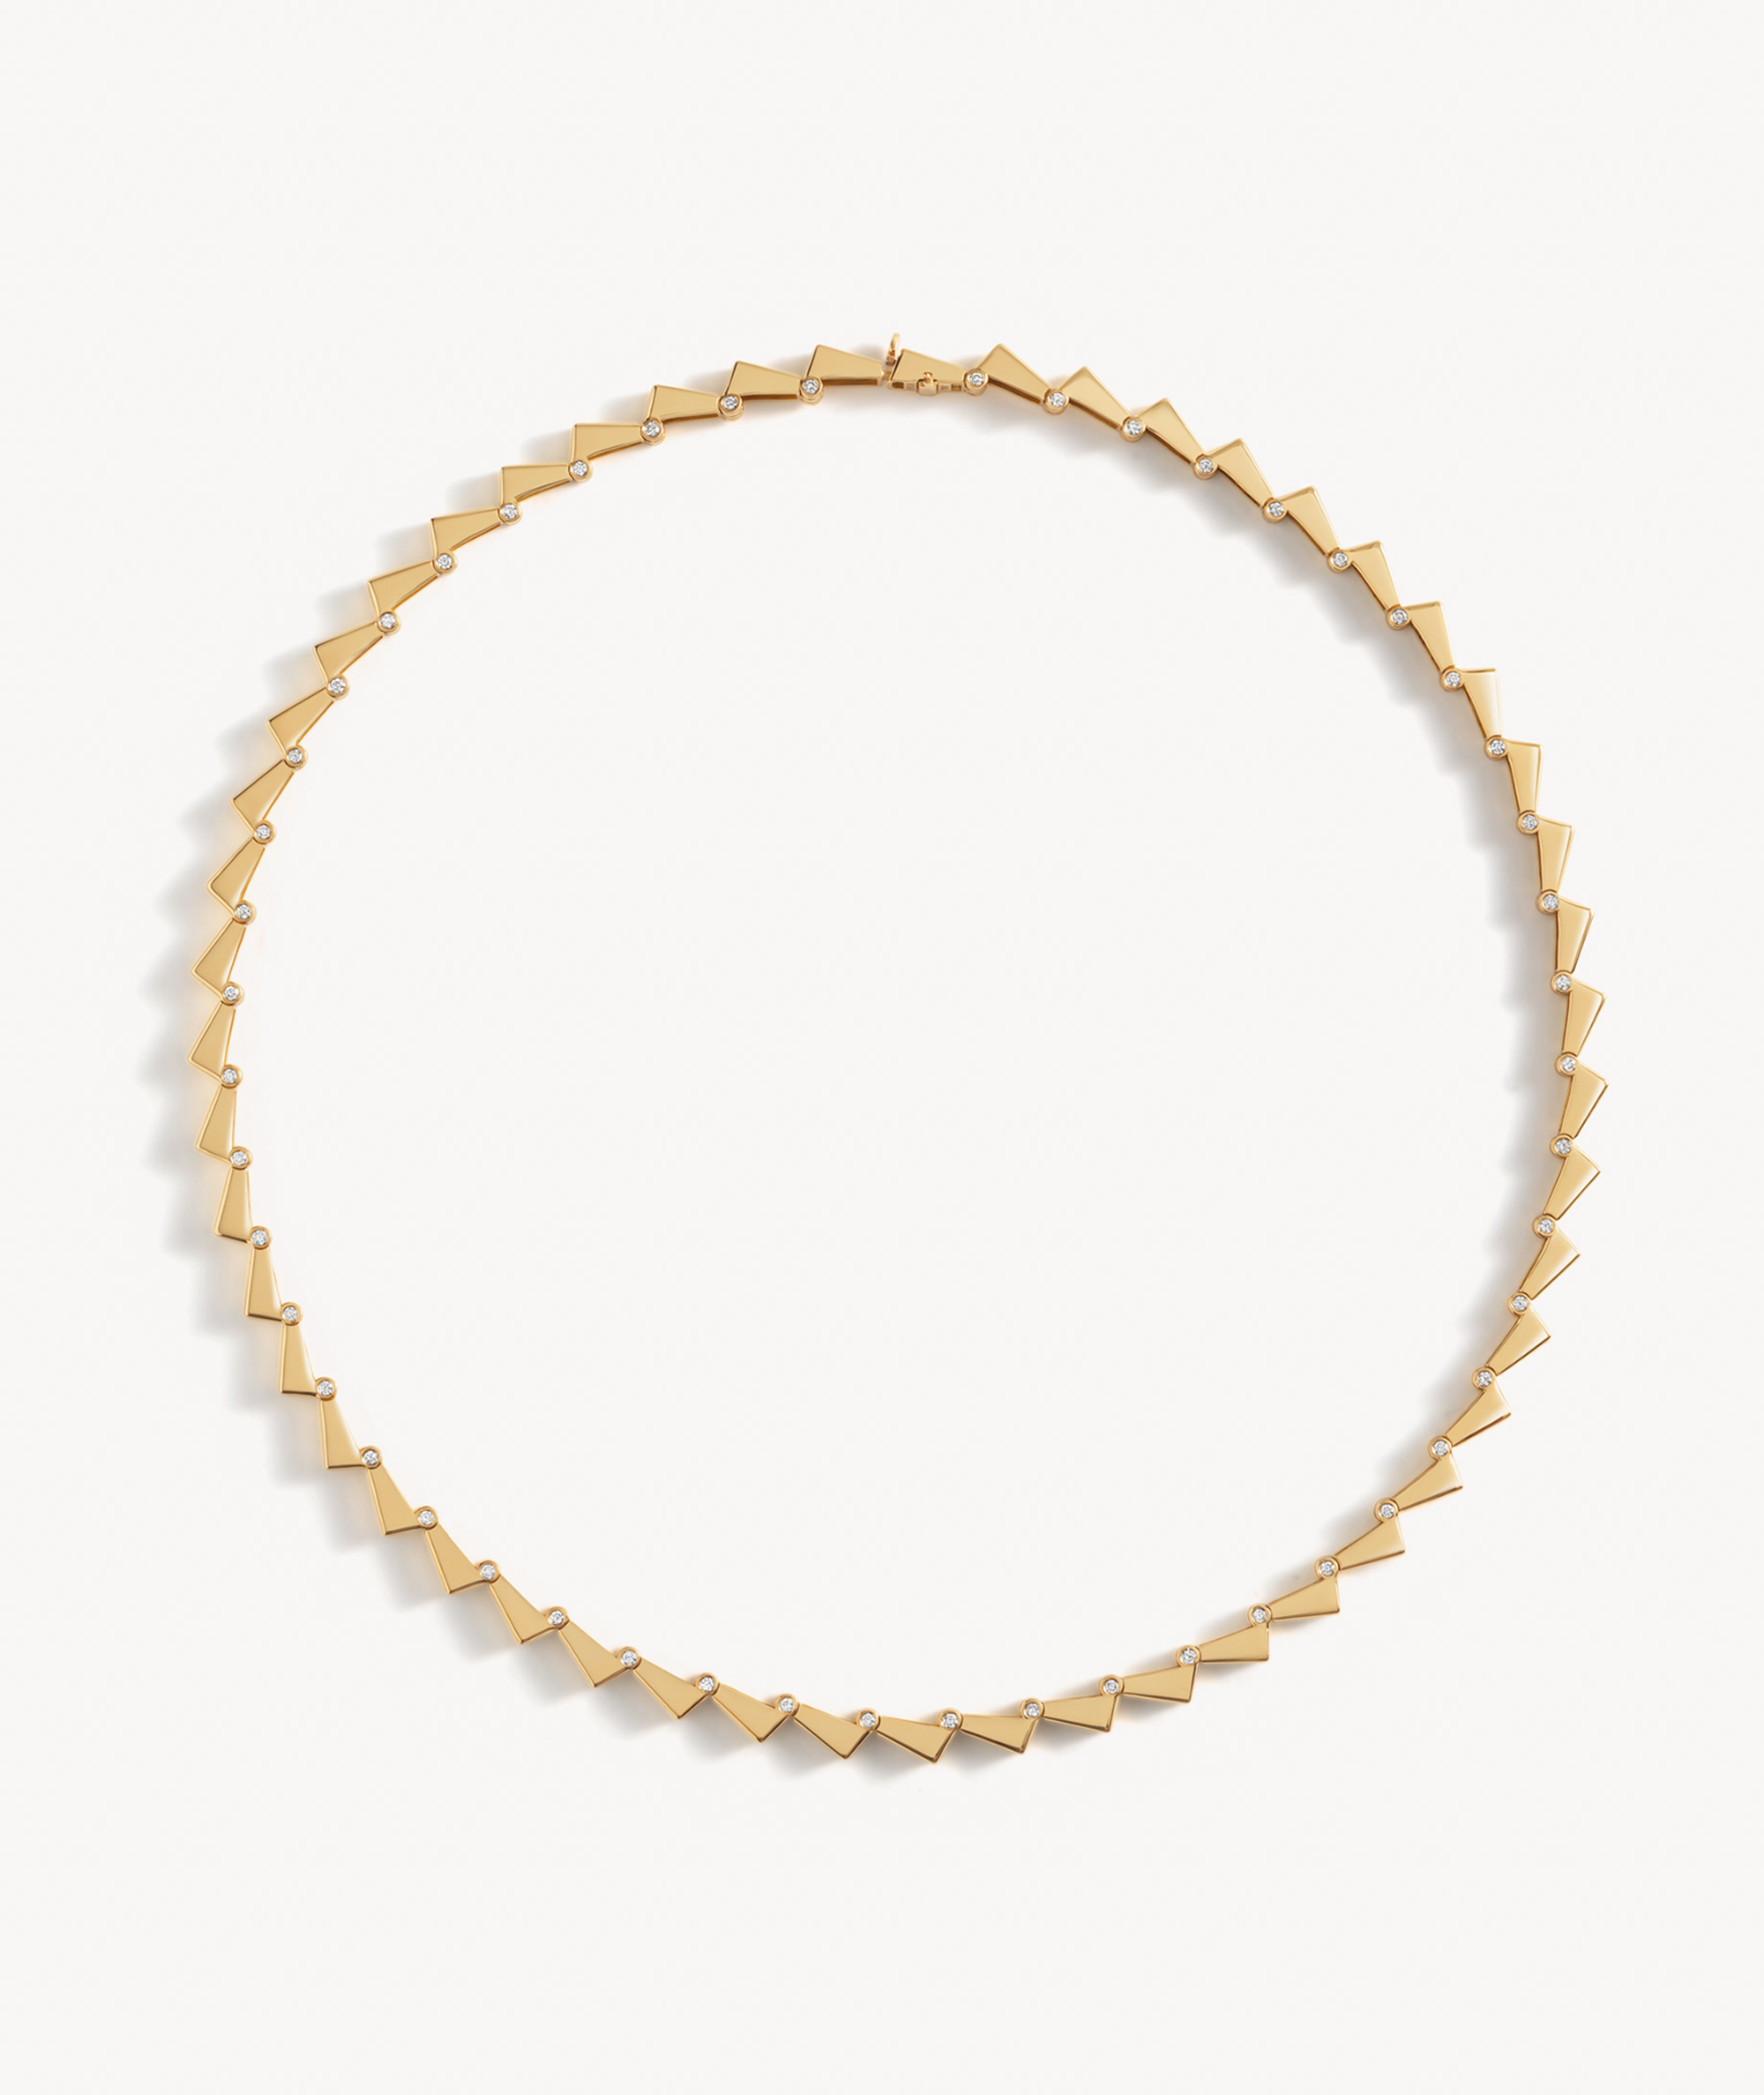 EREDE necklace in 18k recycled yellow gold and lab-grown diamonds.